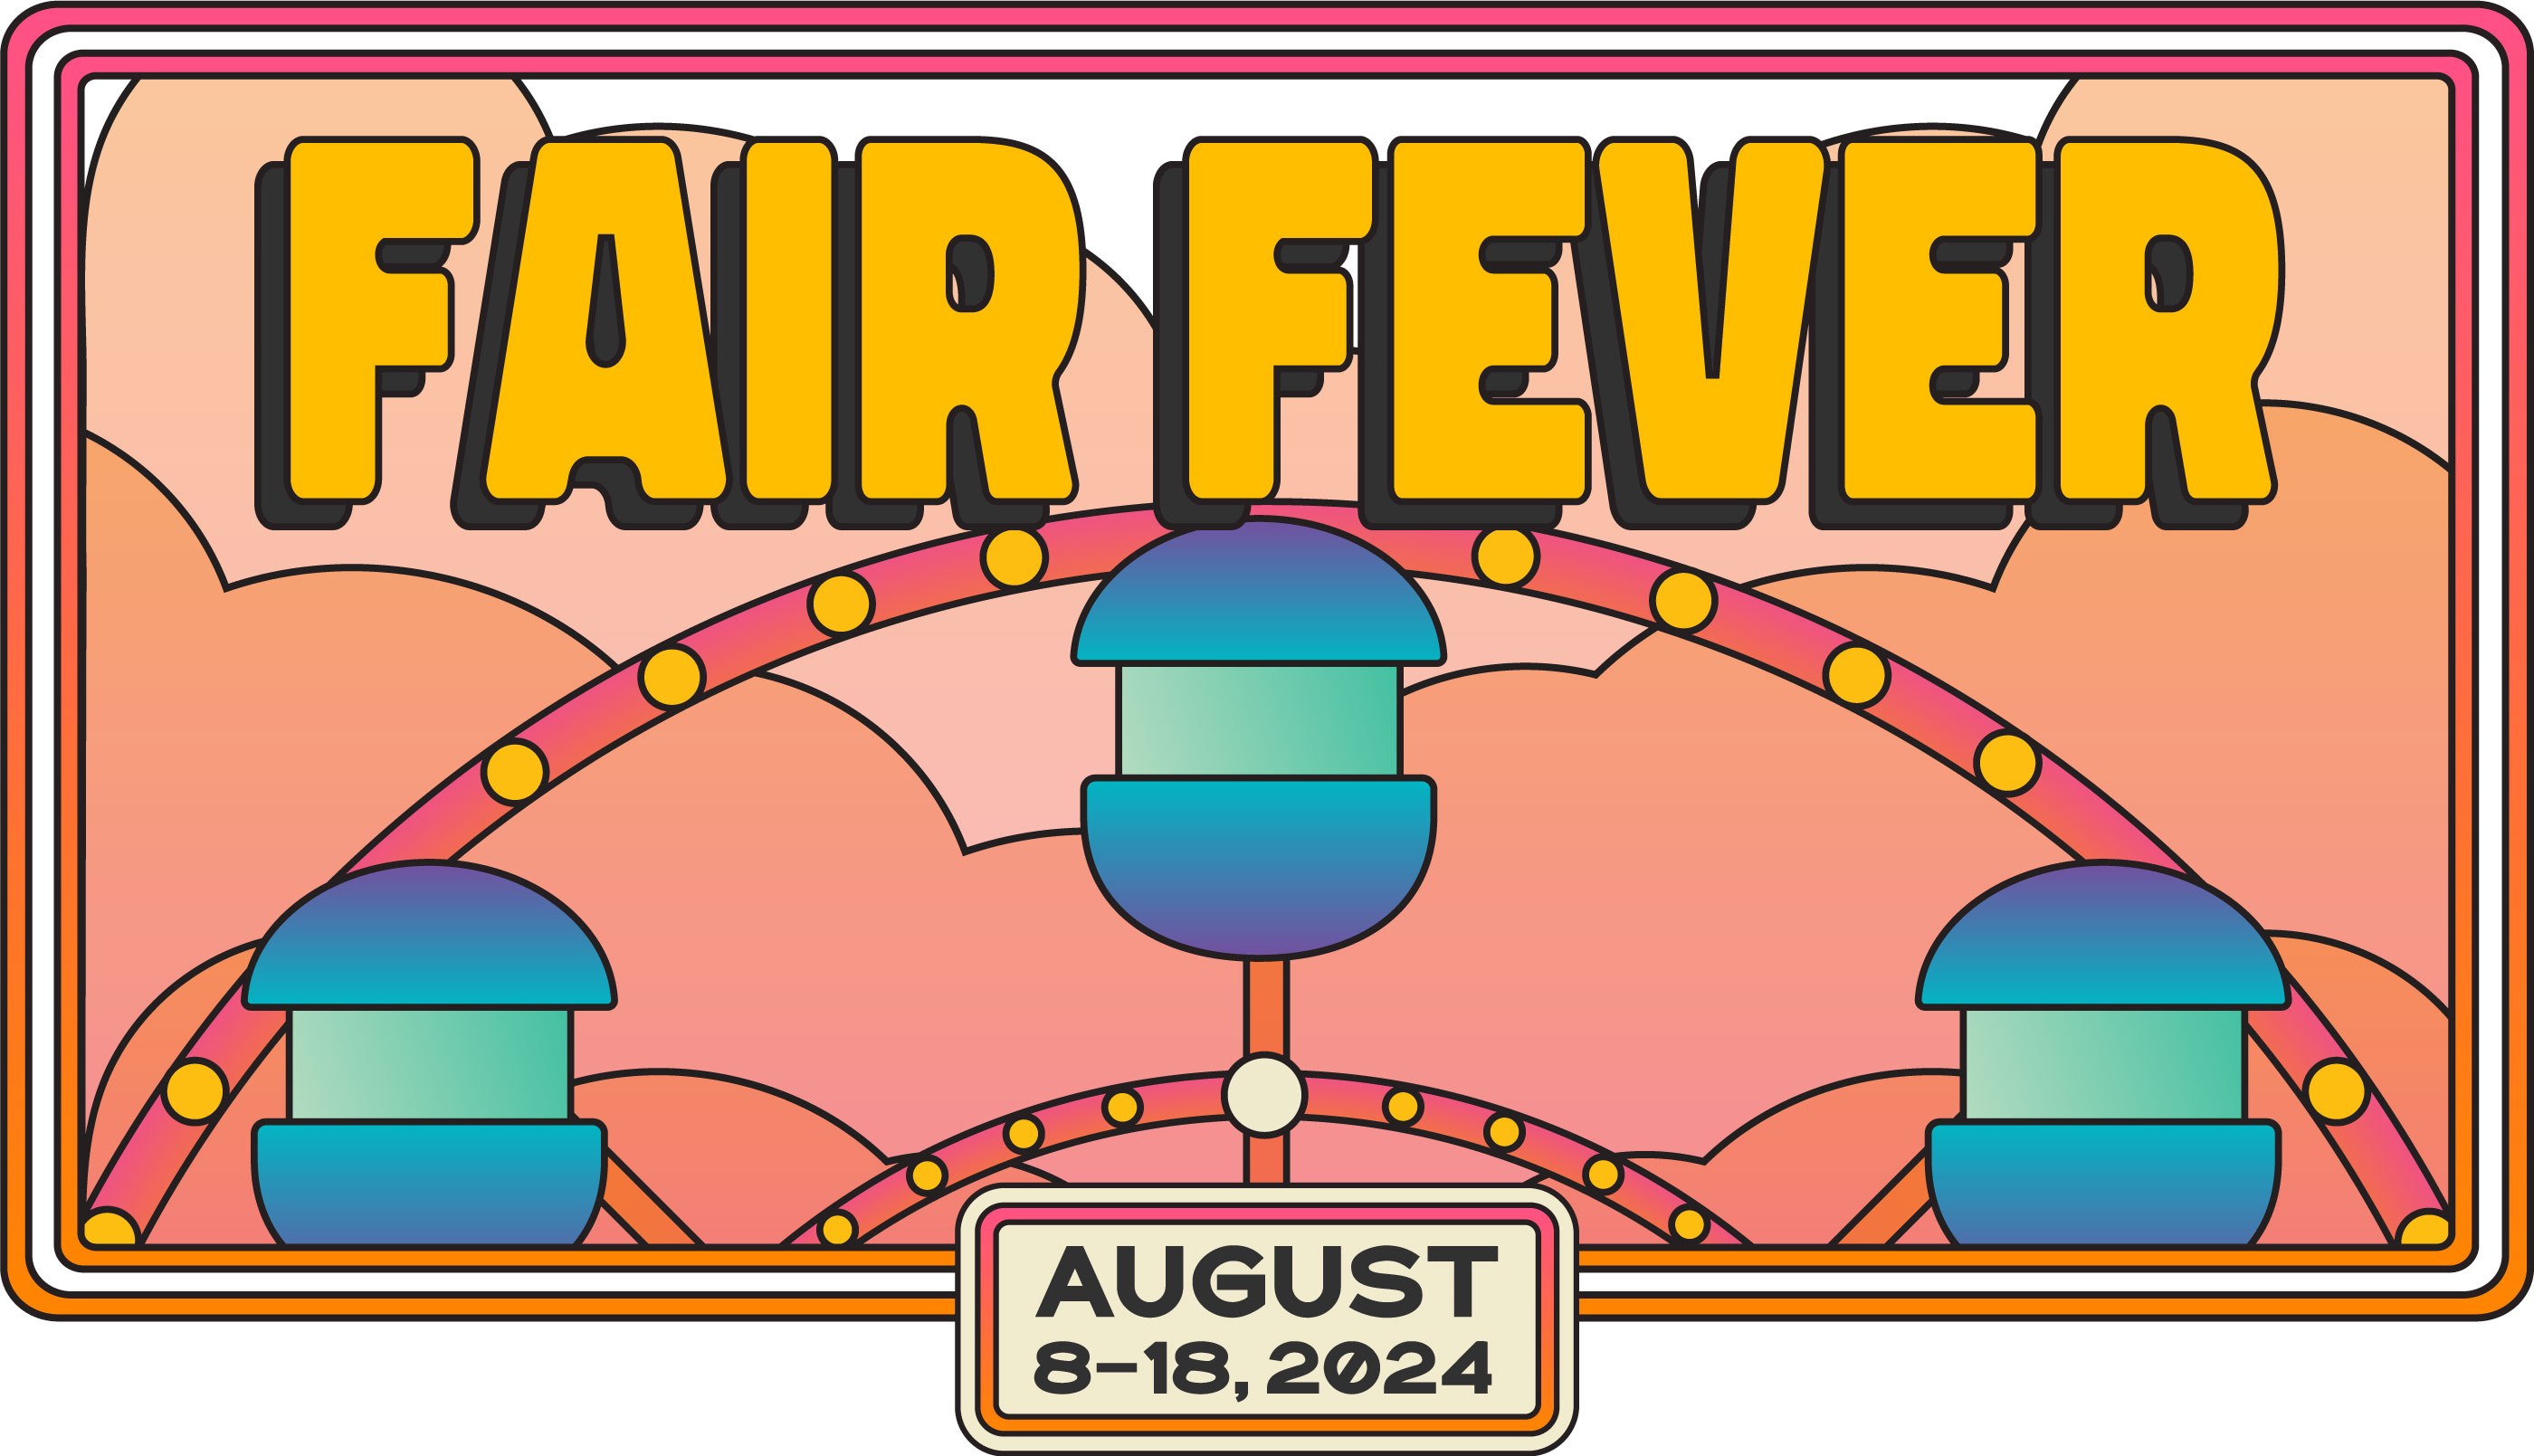 Iowa State Fair Tickets 2024 Get Your Passes Now! EventsLiker